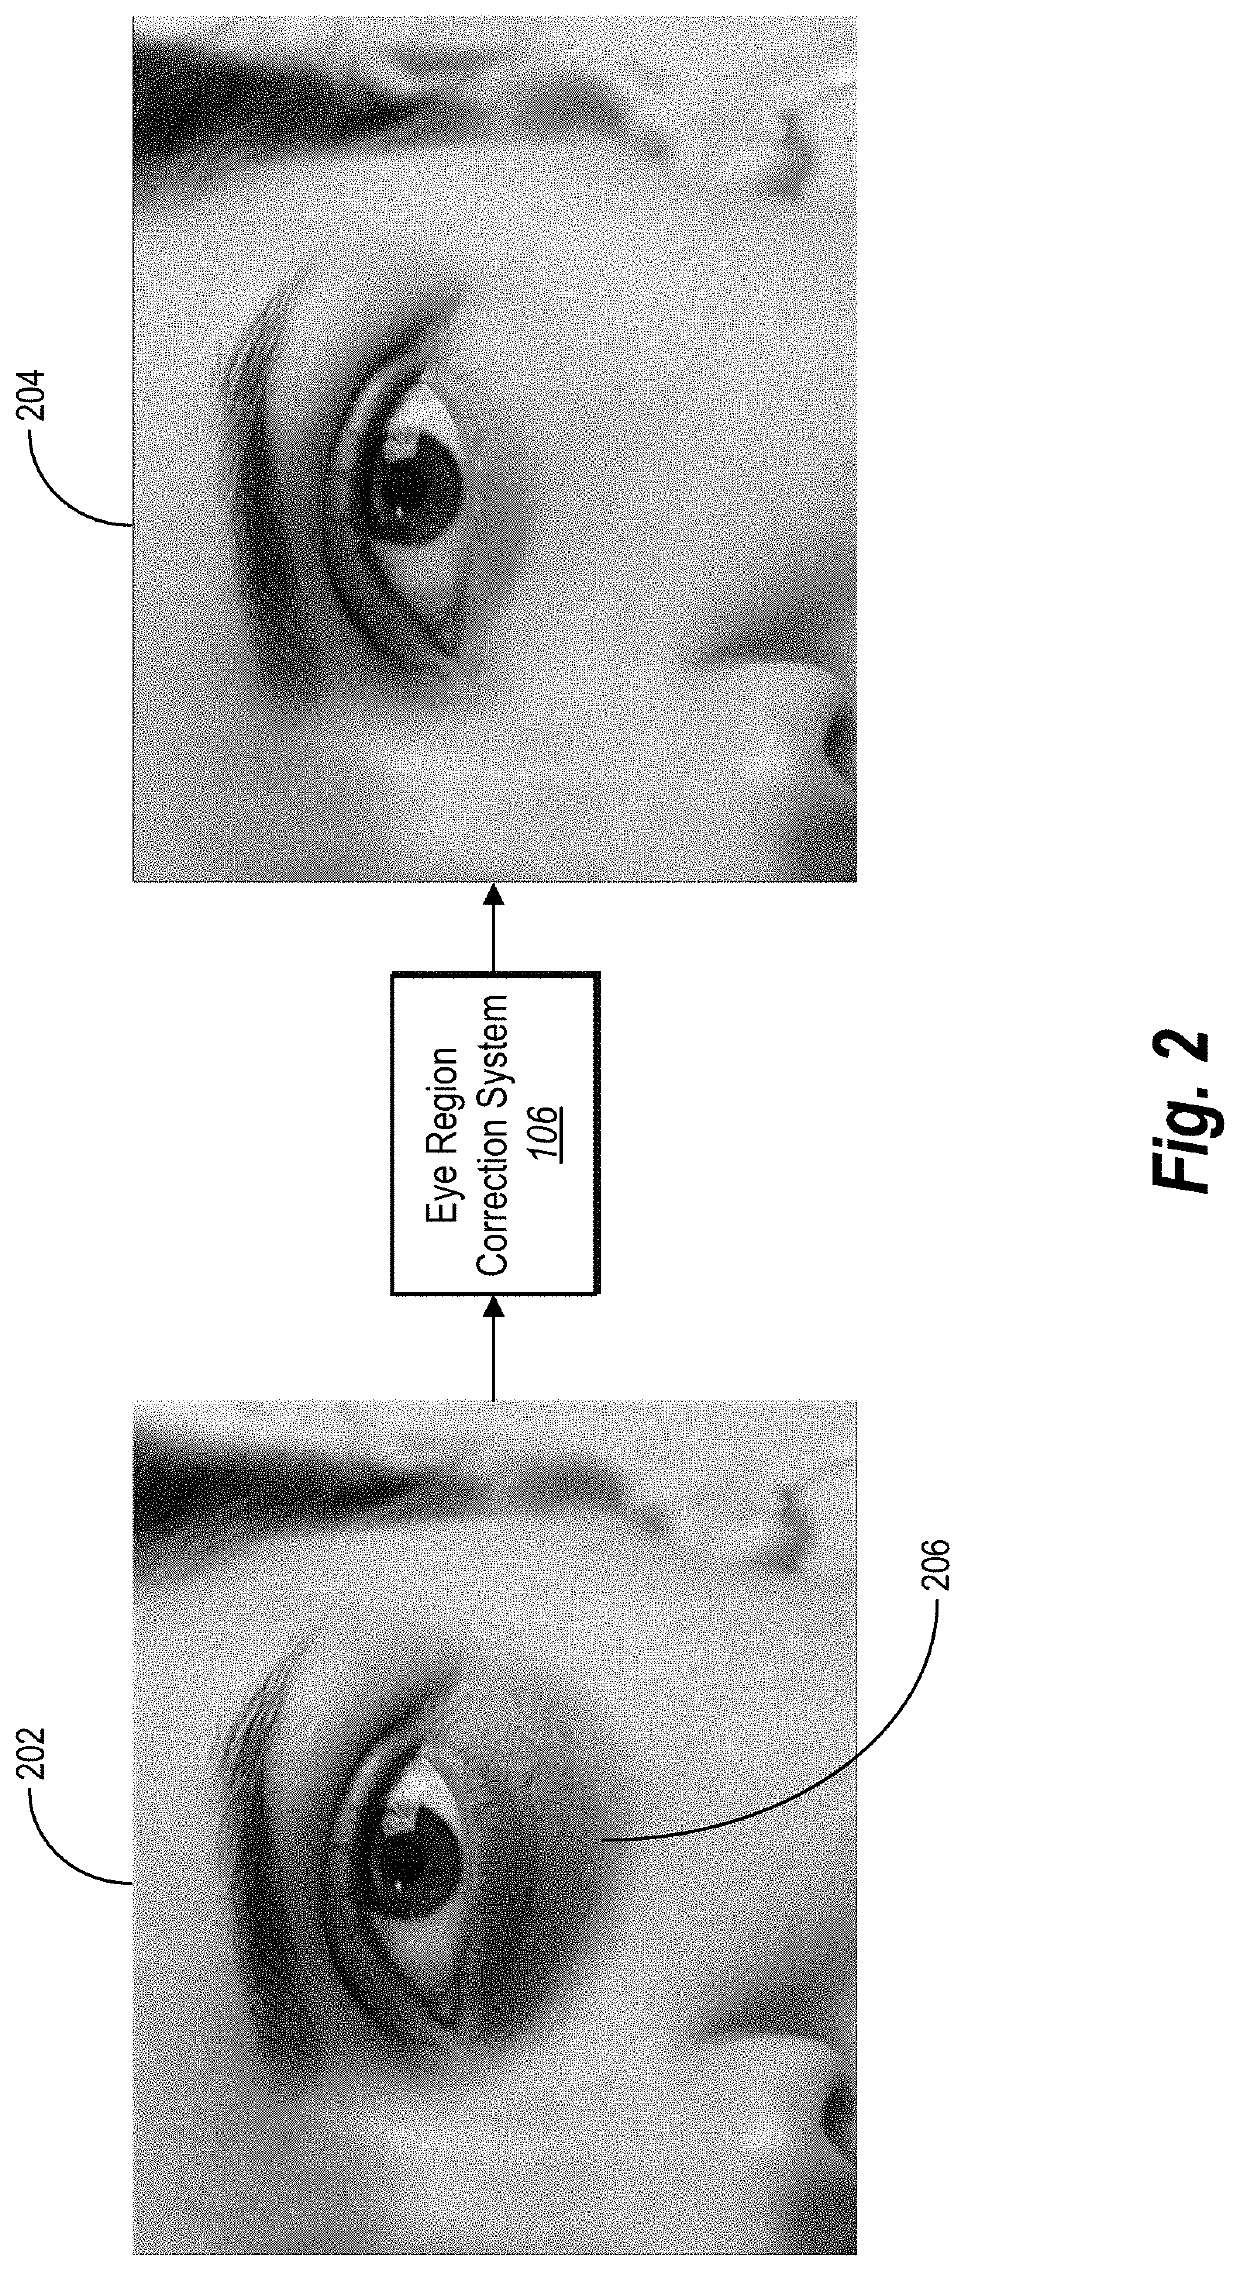 Automatically correcting eye region artifacts in digital images portraying faces